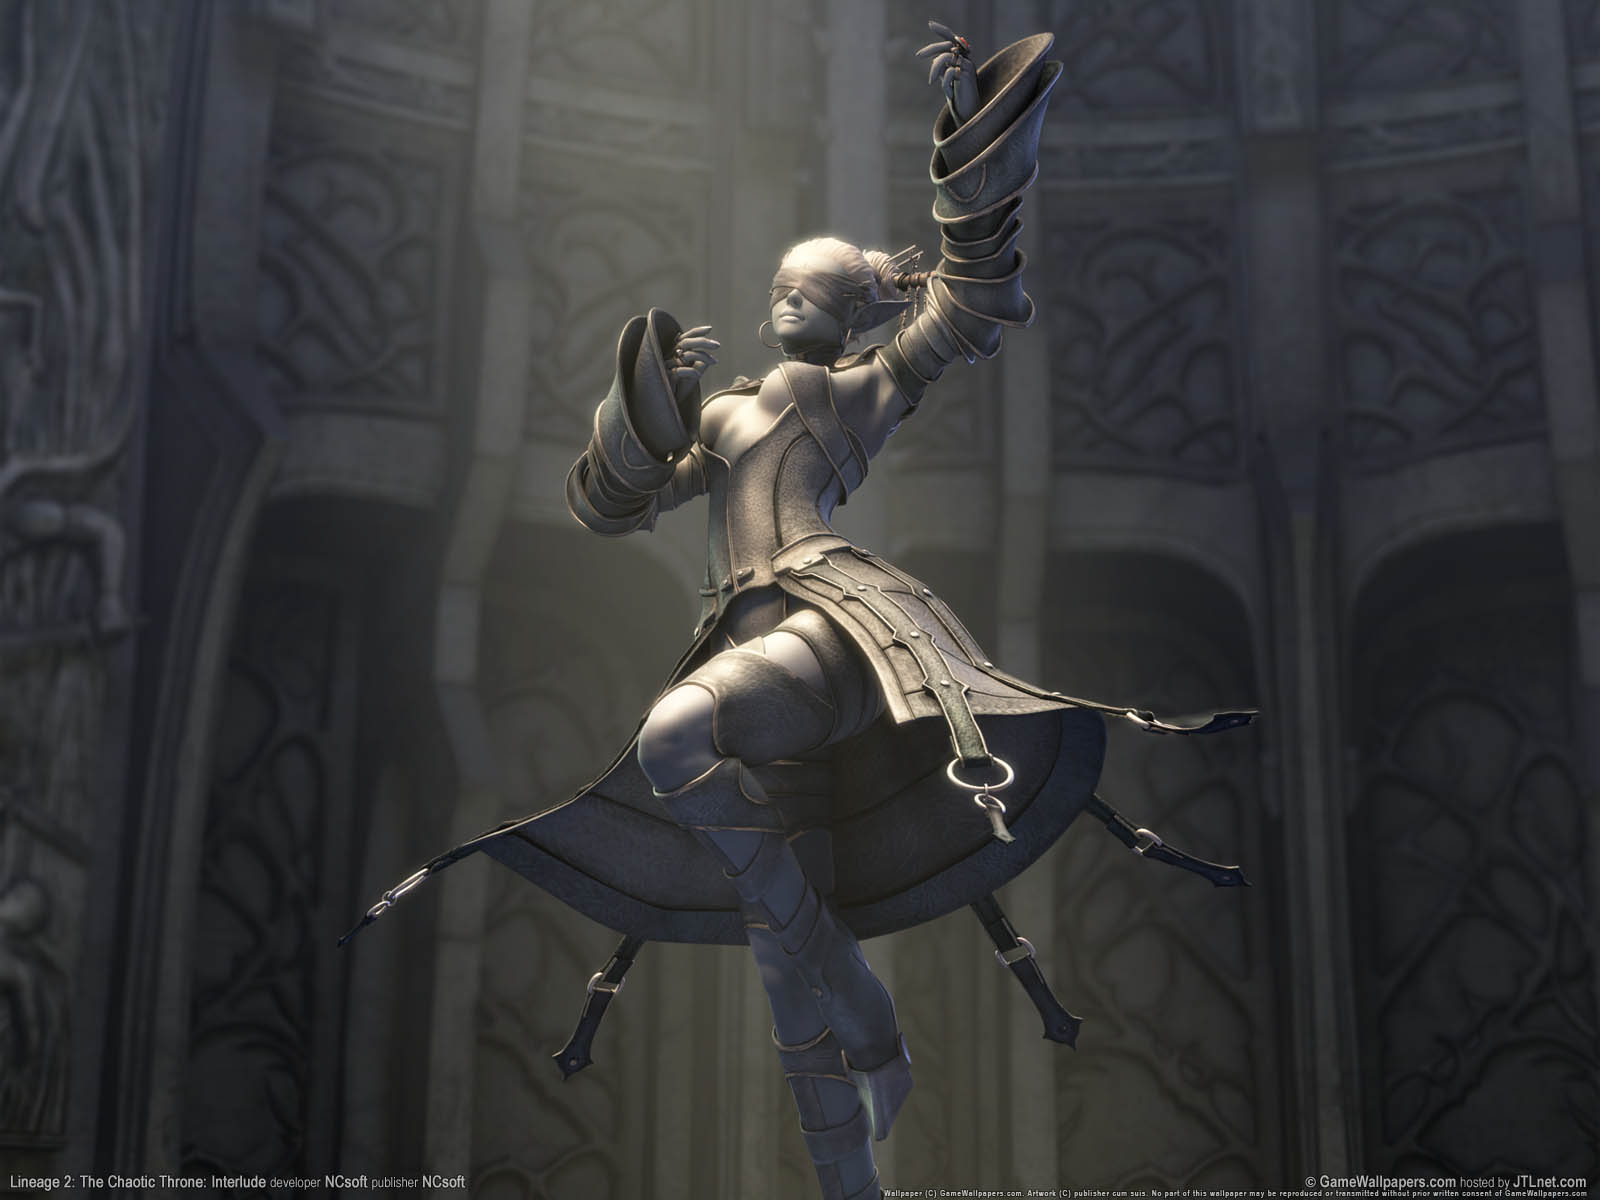 Lineage 2%253A The Chaotic Throne%253A Interlude wallpaper 02 1600x1200